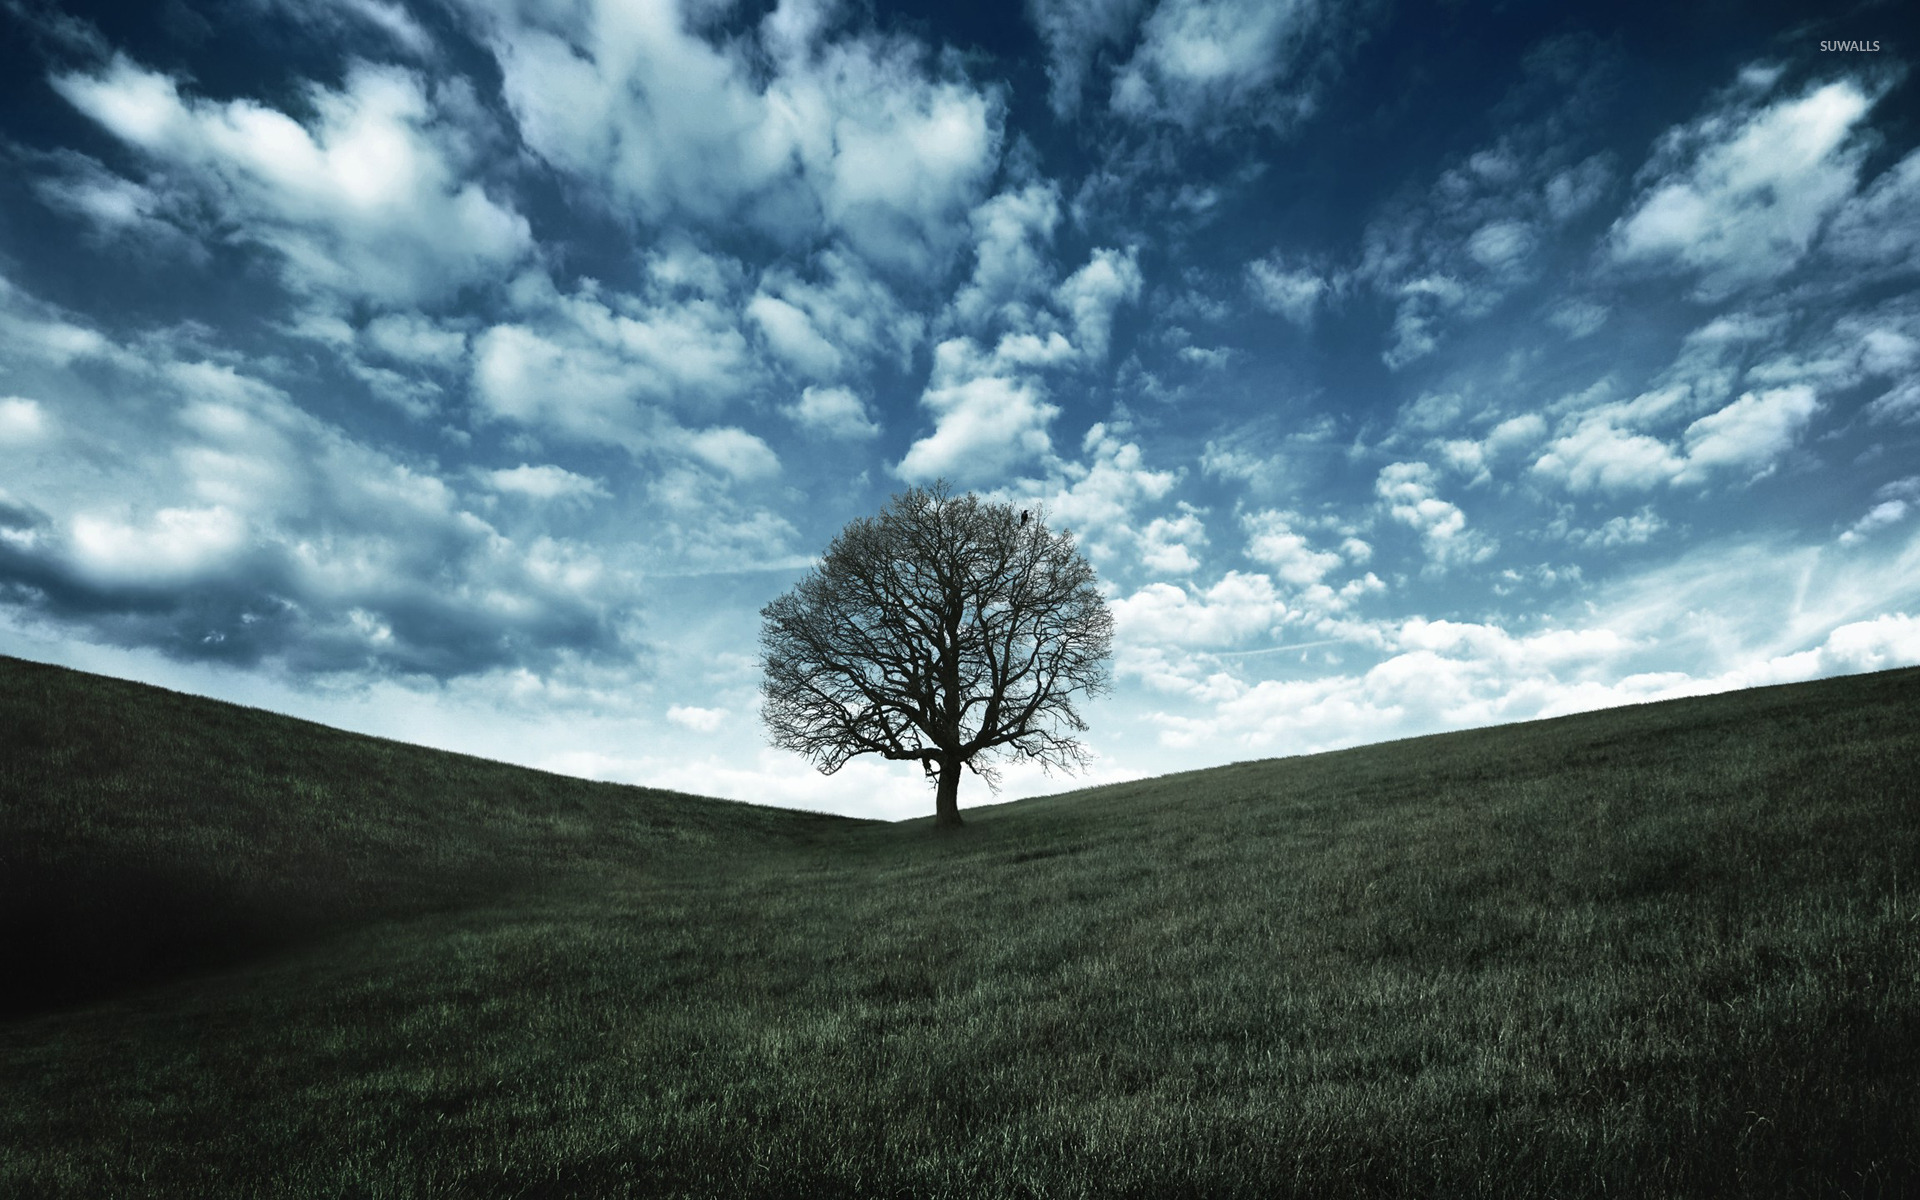 Lonely tree wallpaper - Nature wallpapers - #17105